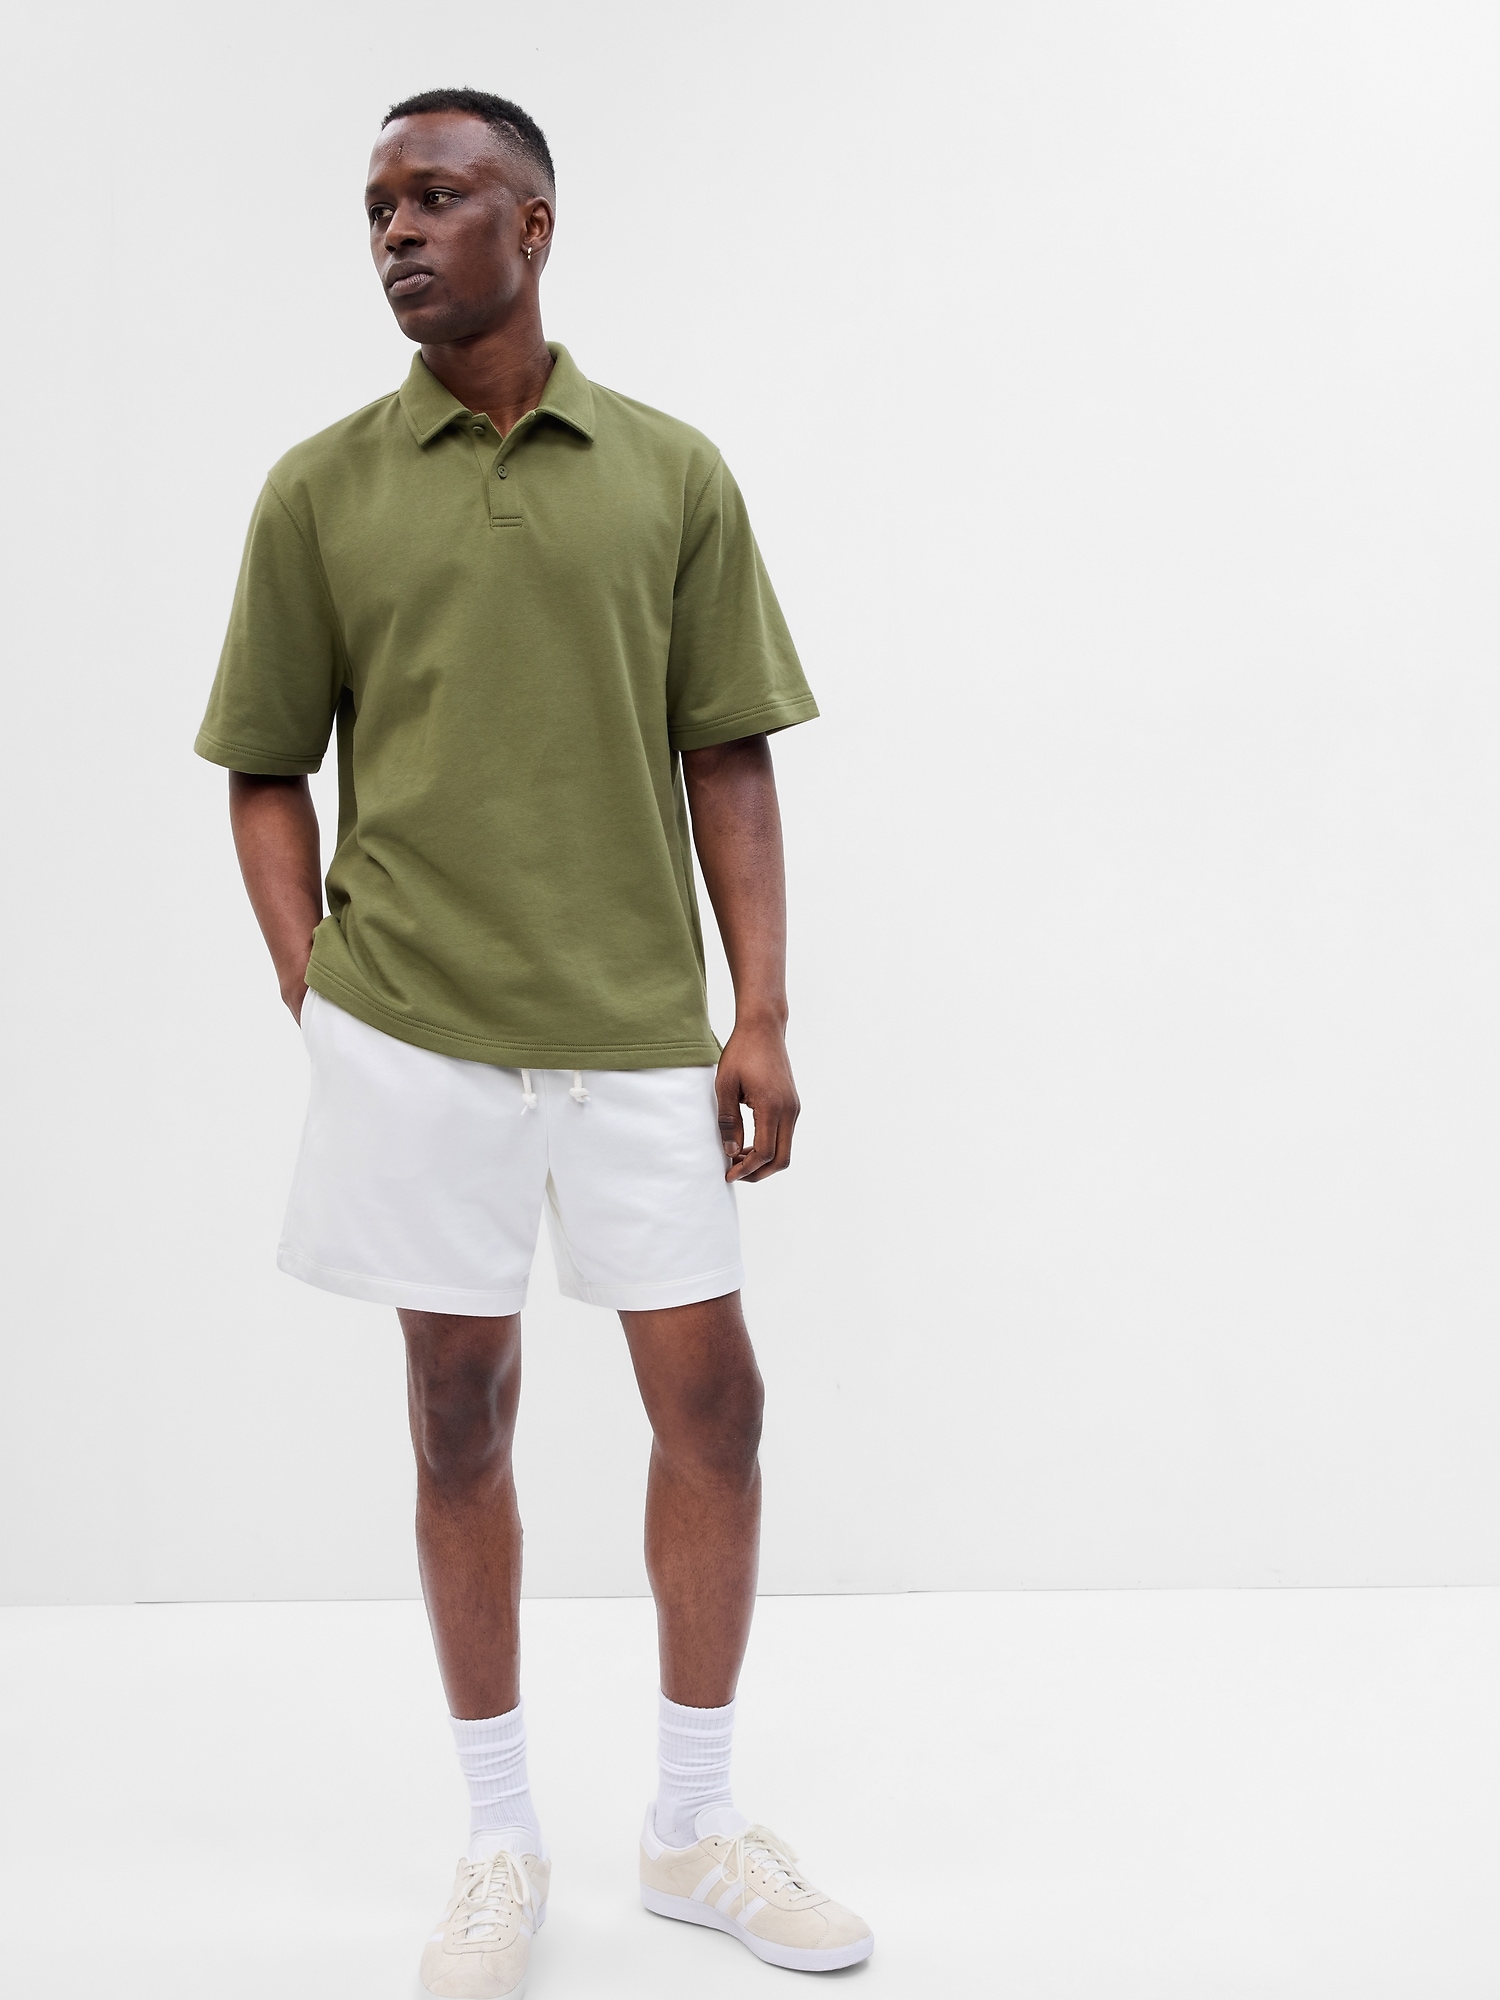 French Terry Shorts | Gap